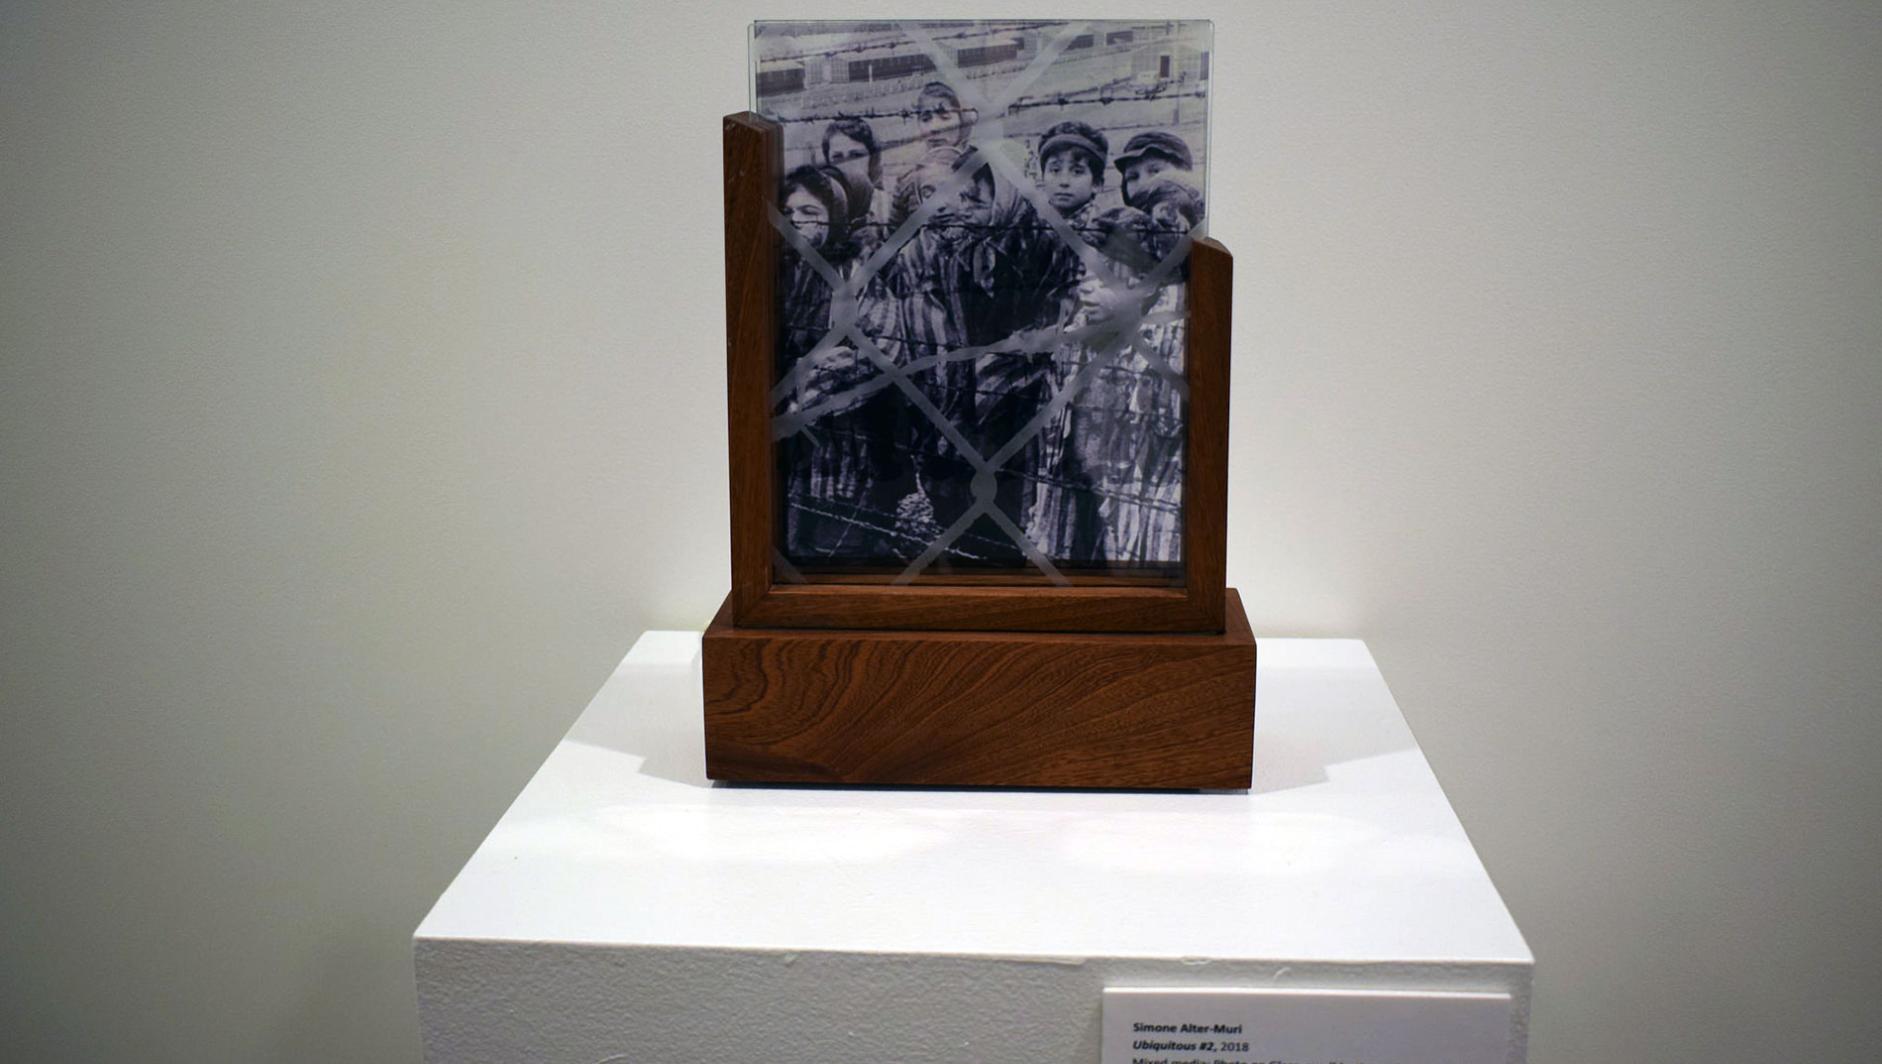 Image of a social justice print in a gallery